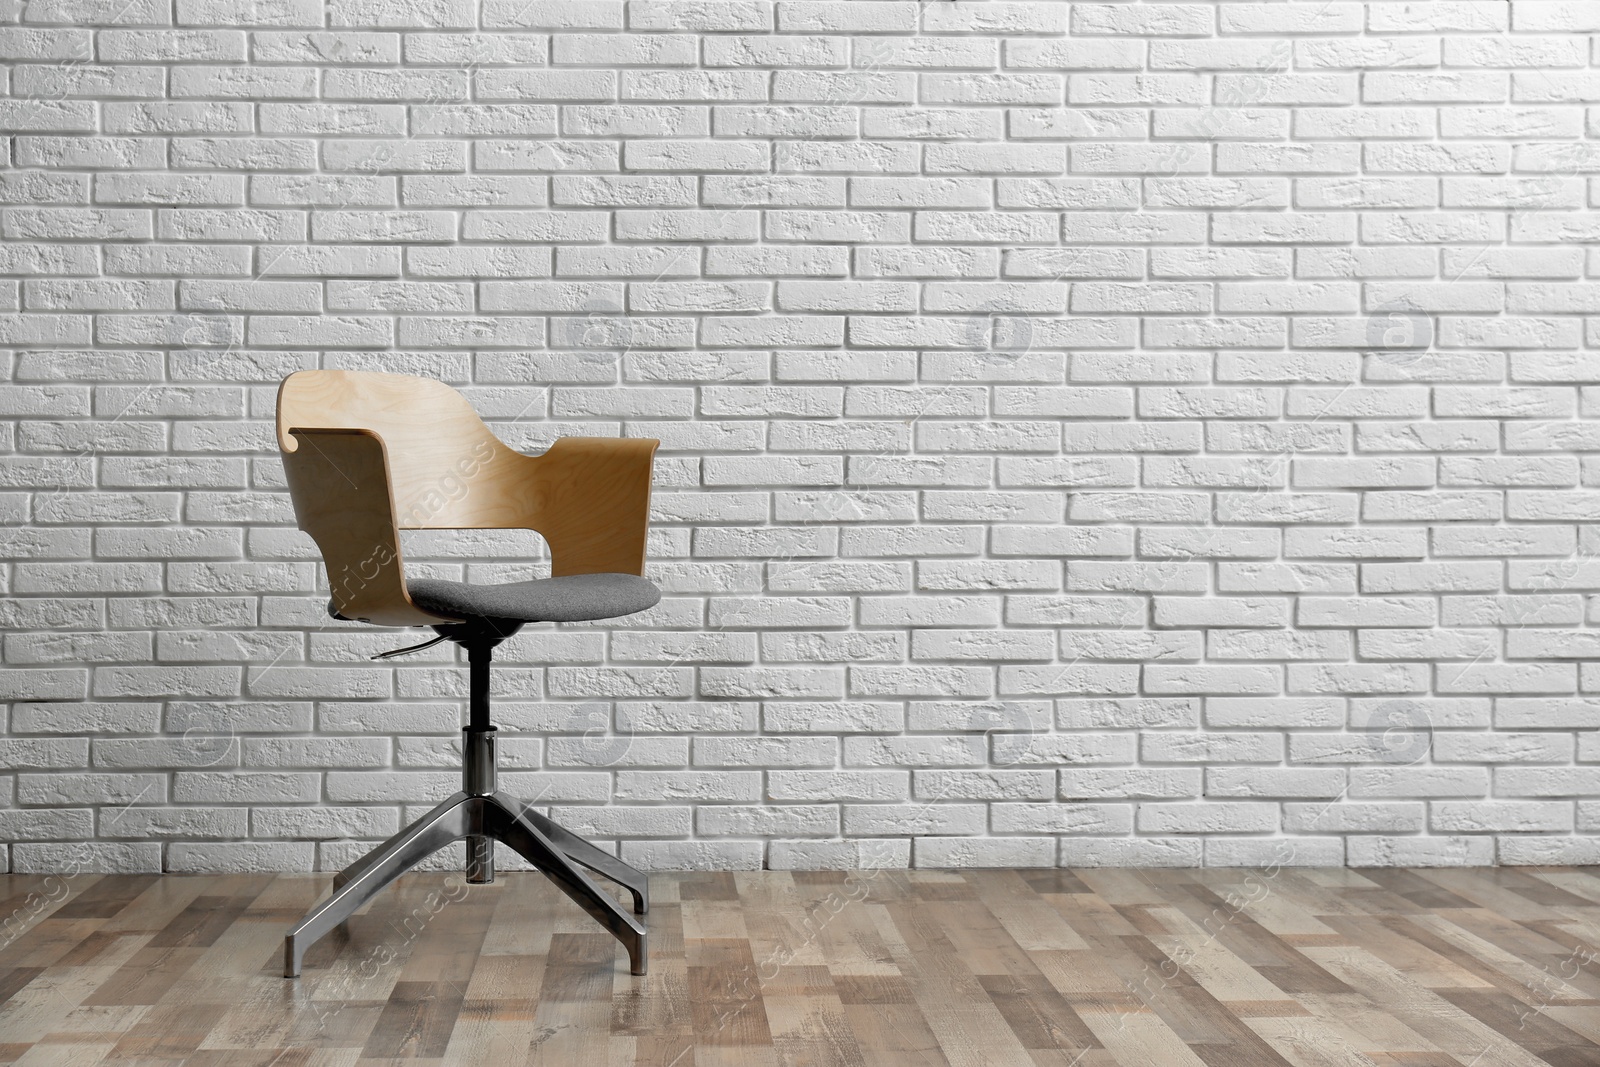 Photo of Comfortable office chair near white brick wall indoors. Space for text